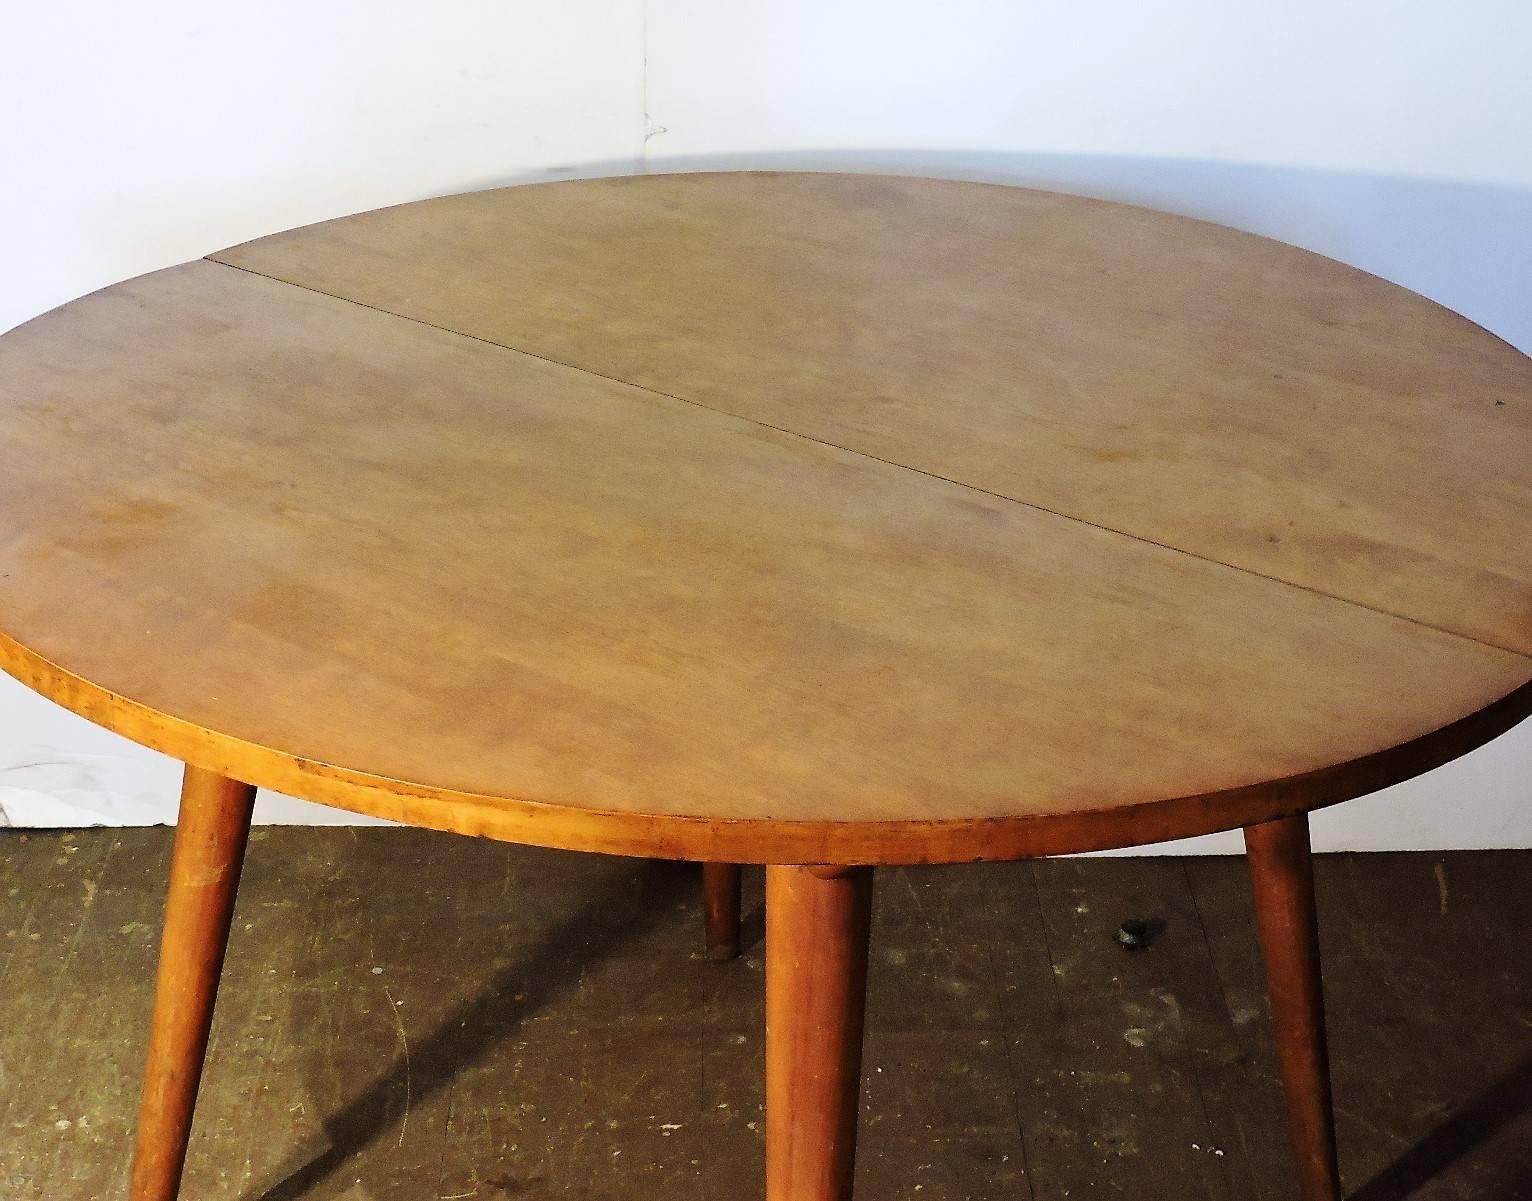 A Russel Wright extension dining table for Conant Ball American Modern line with round top and perfectly tapered legs inset with long angled rods at top. Beautiful sculptural form, circa 1940-1950. Table shown in primary picture without the two